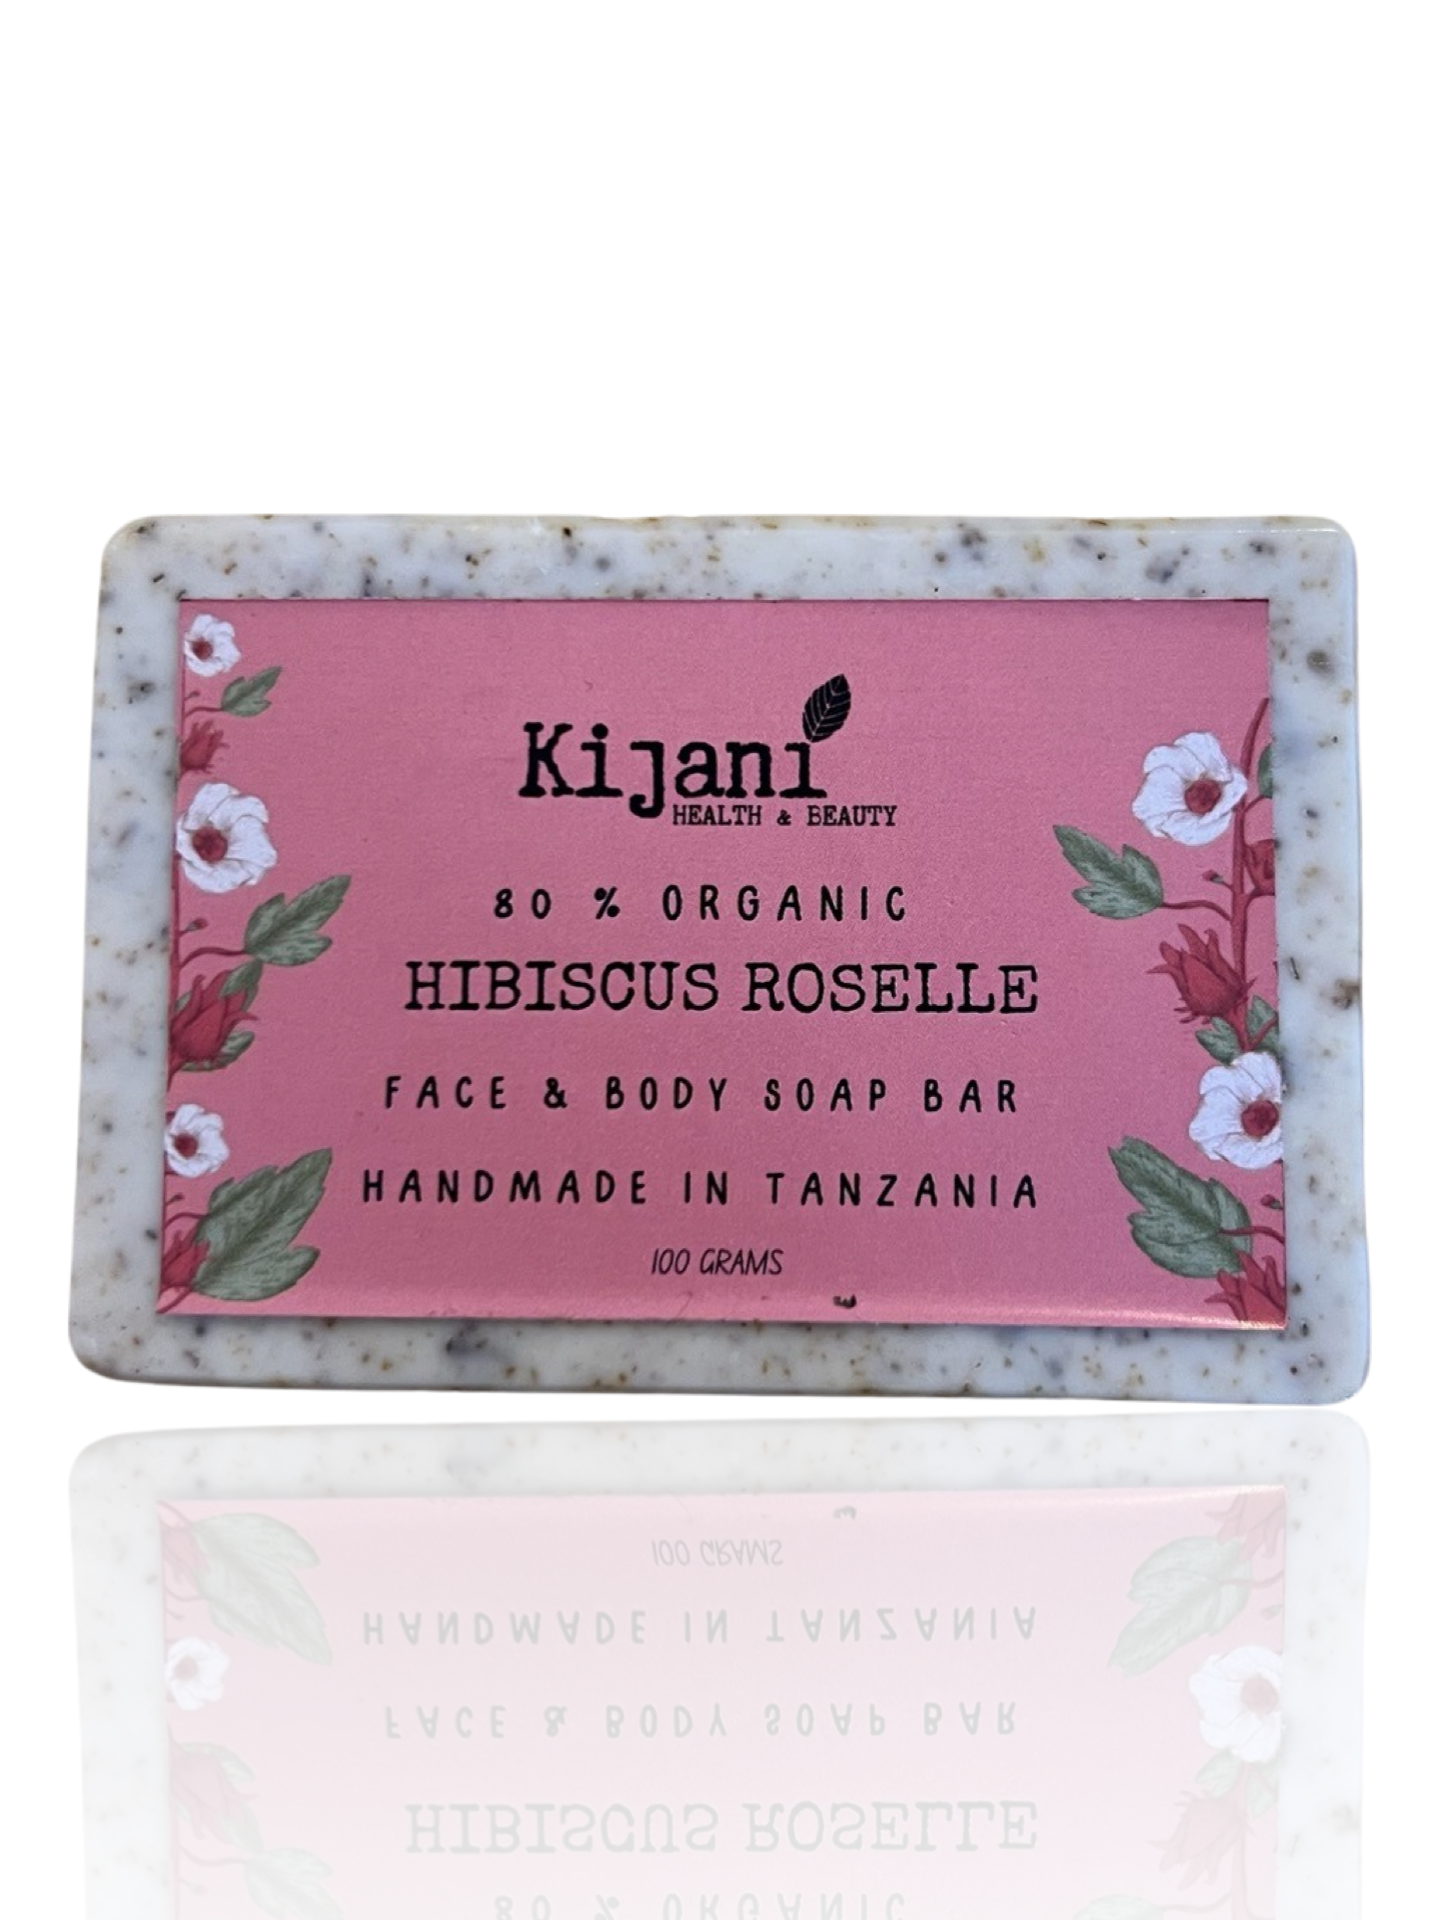 Hibiscus Roselle Face & Body Soap Bar